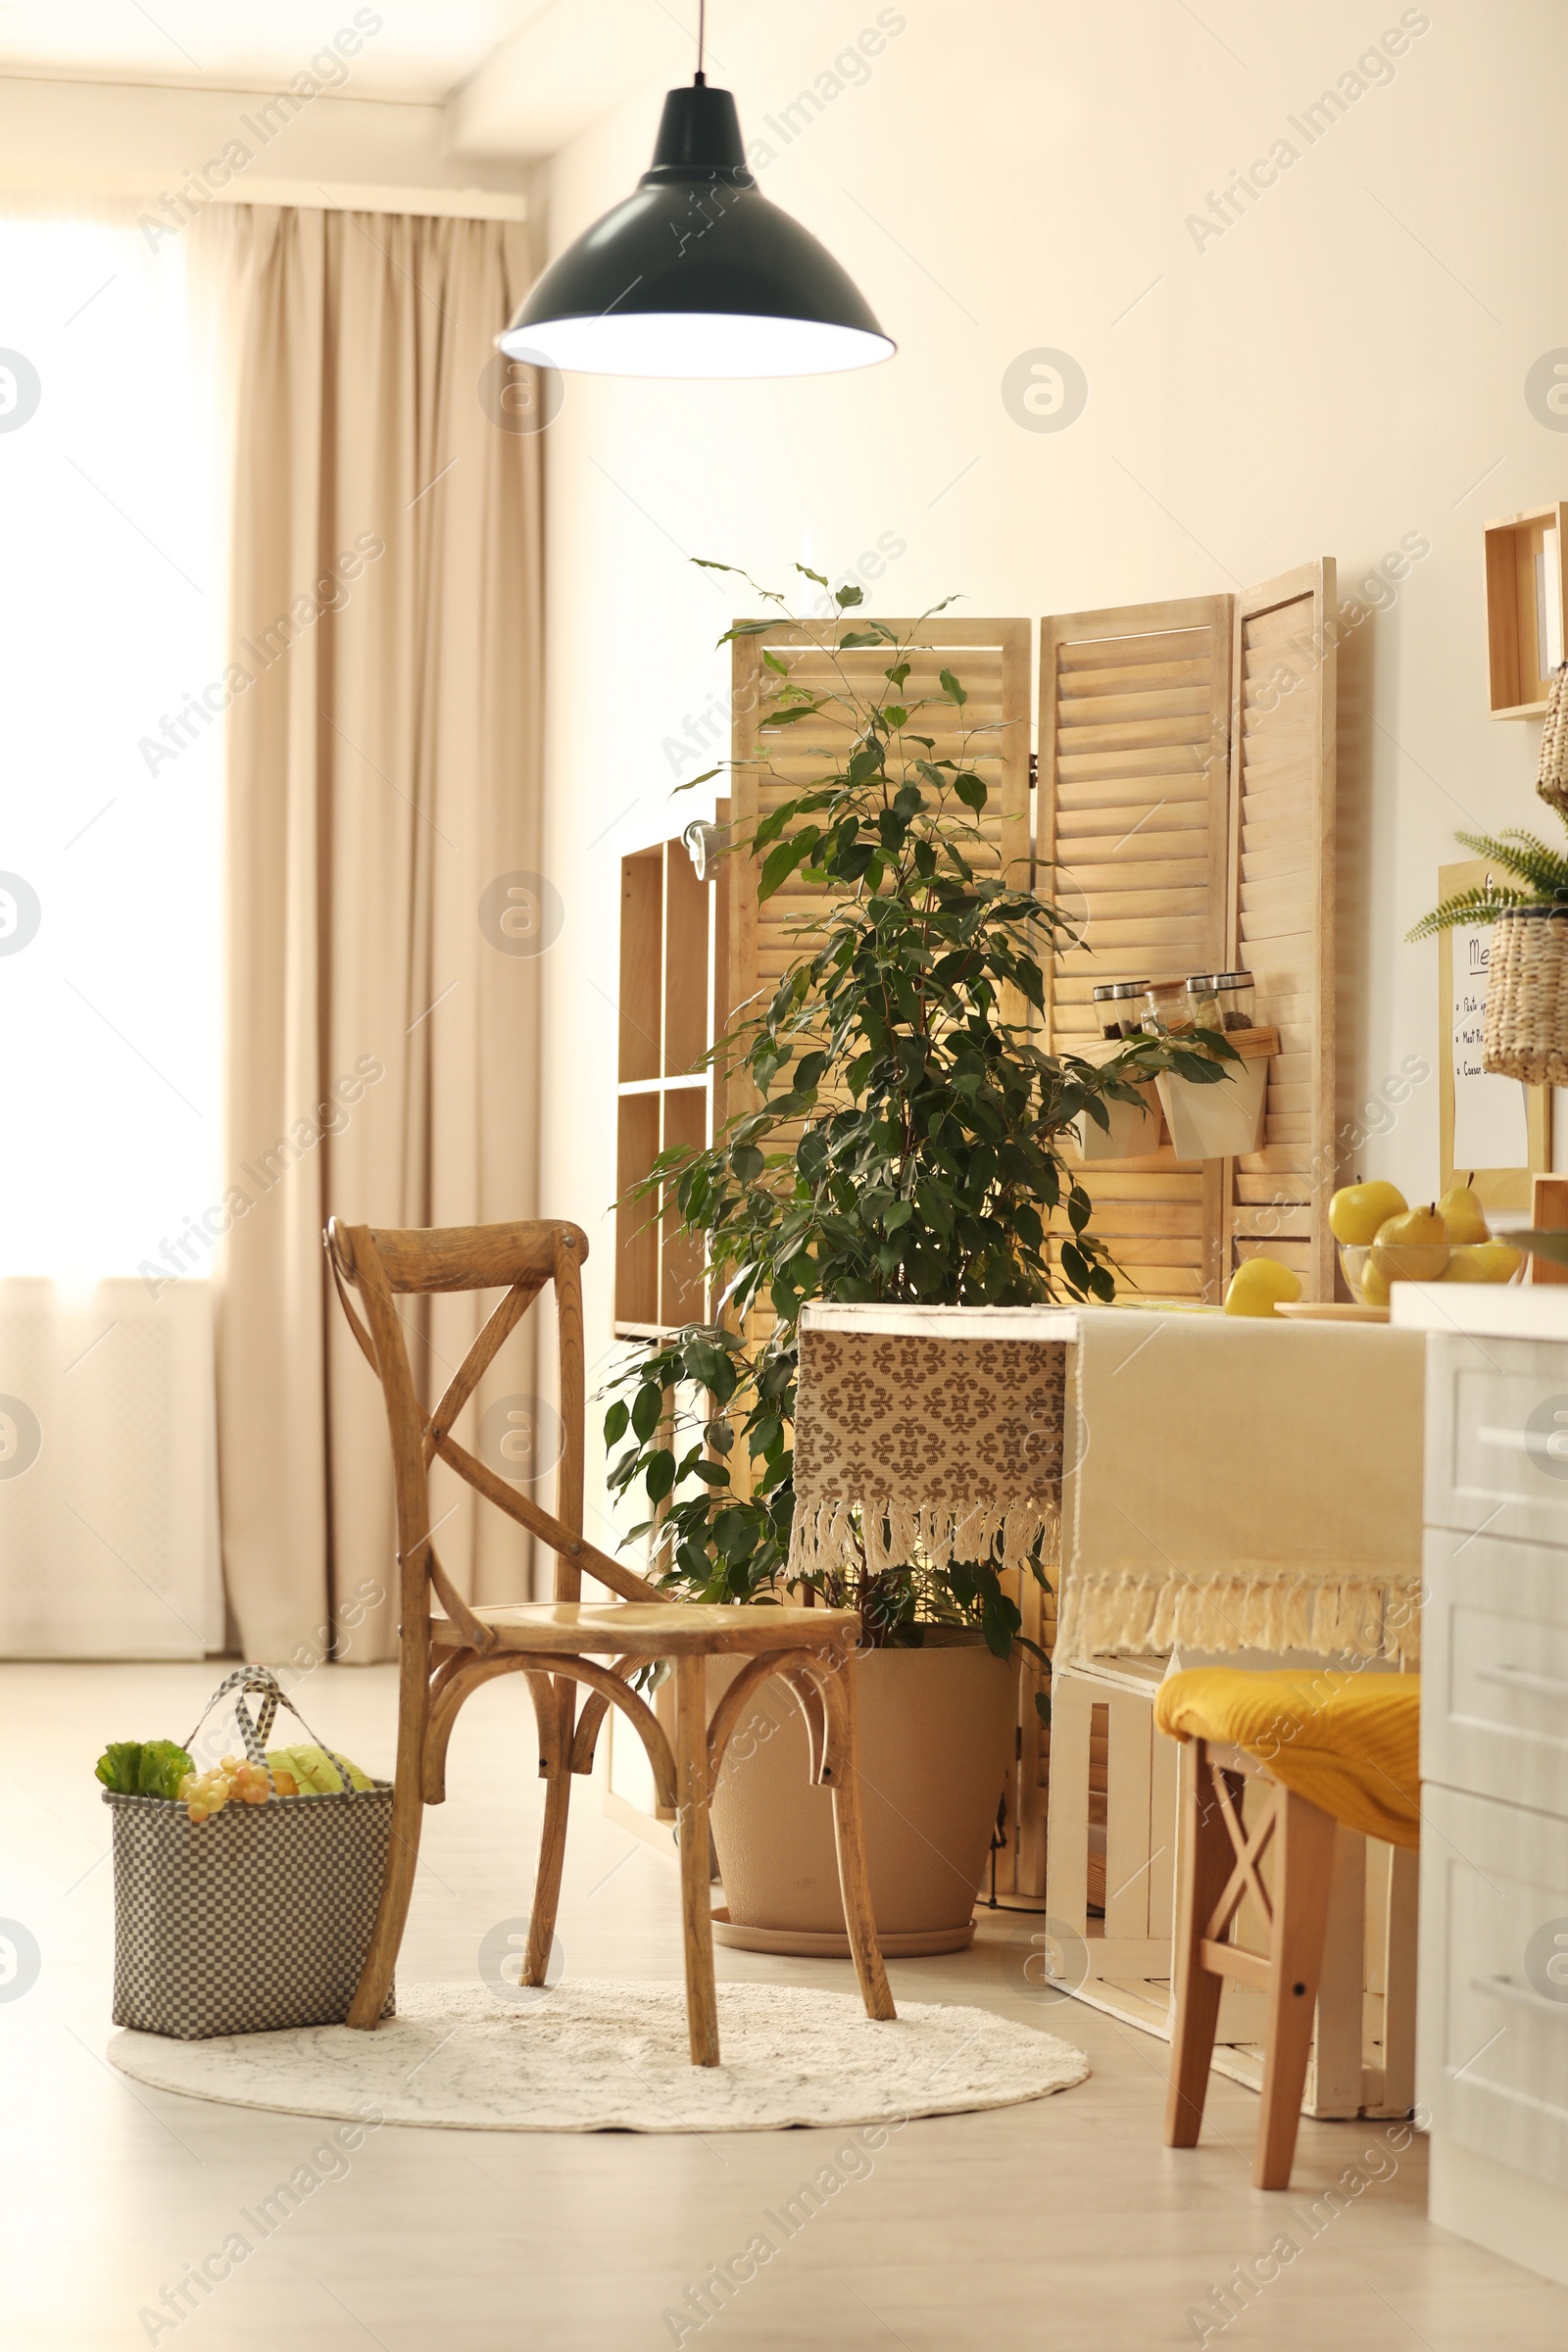 Photo of Modern kitchen interior with wooden crates as eco furniture